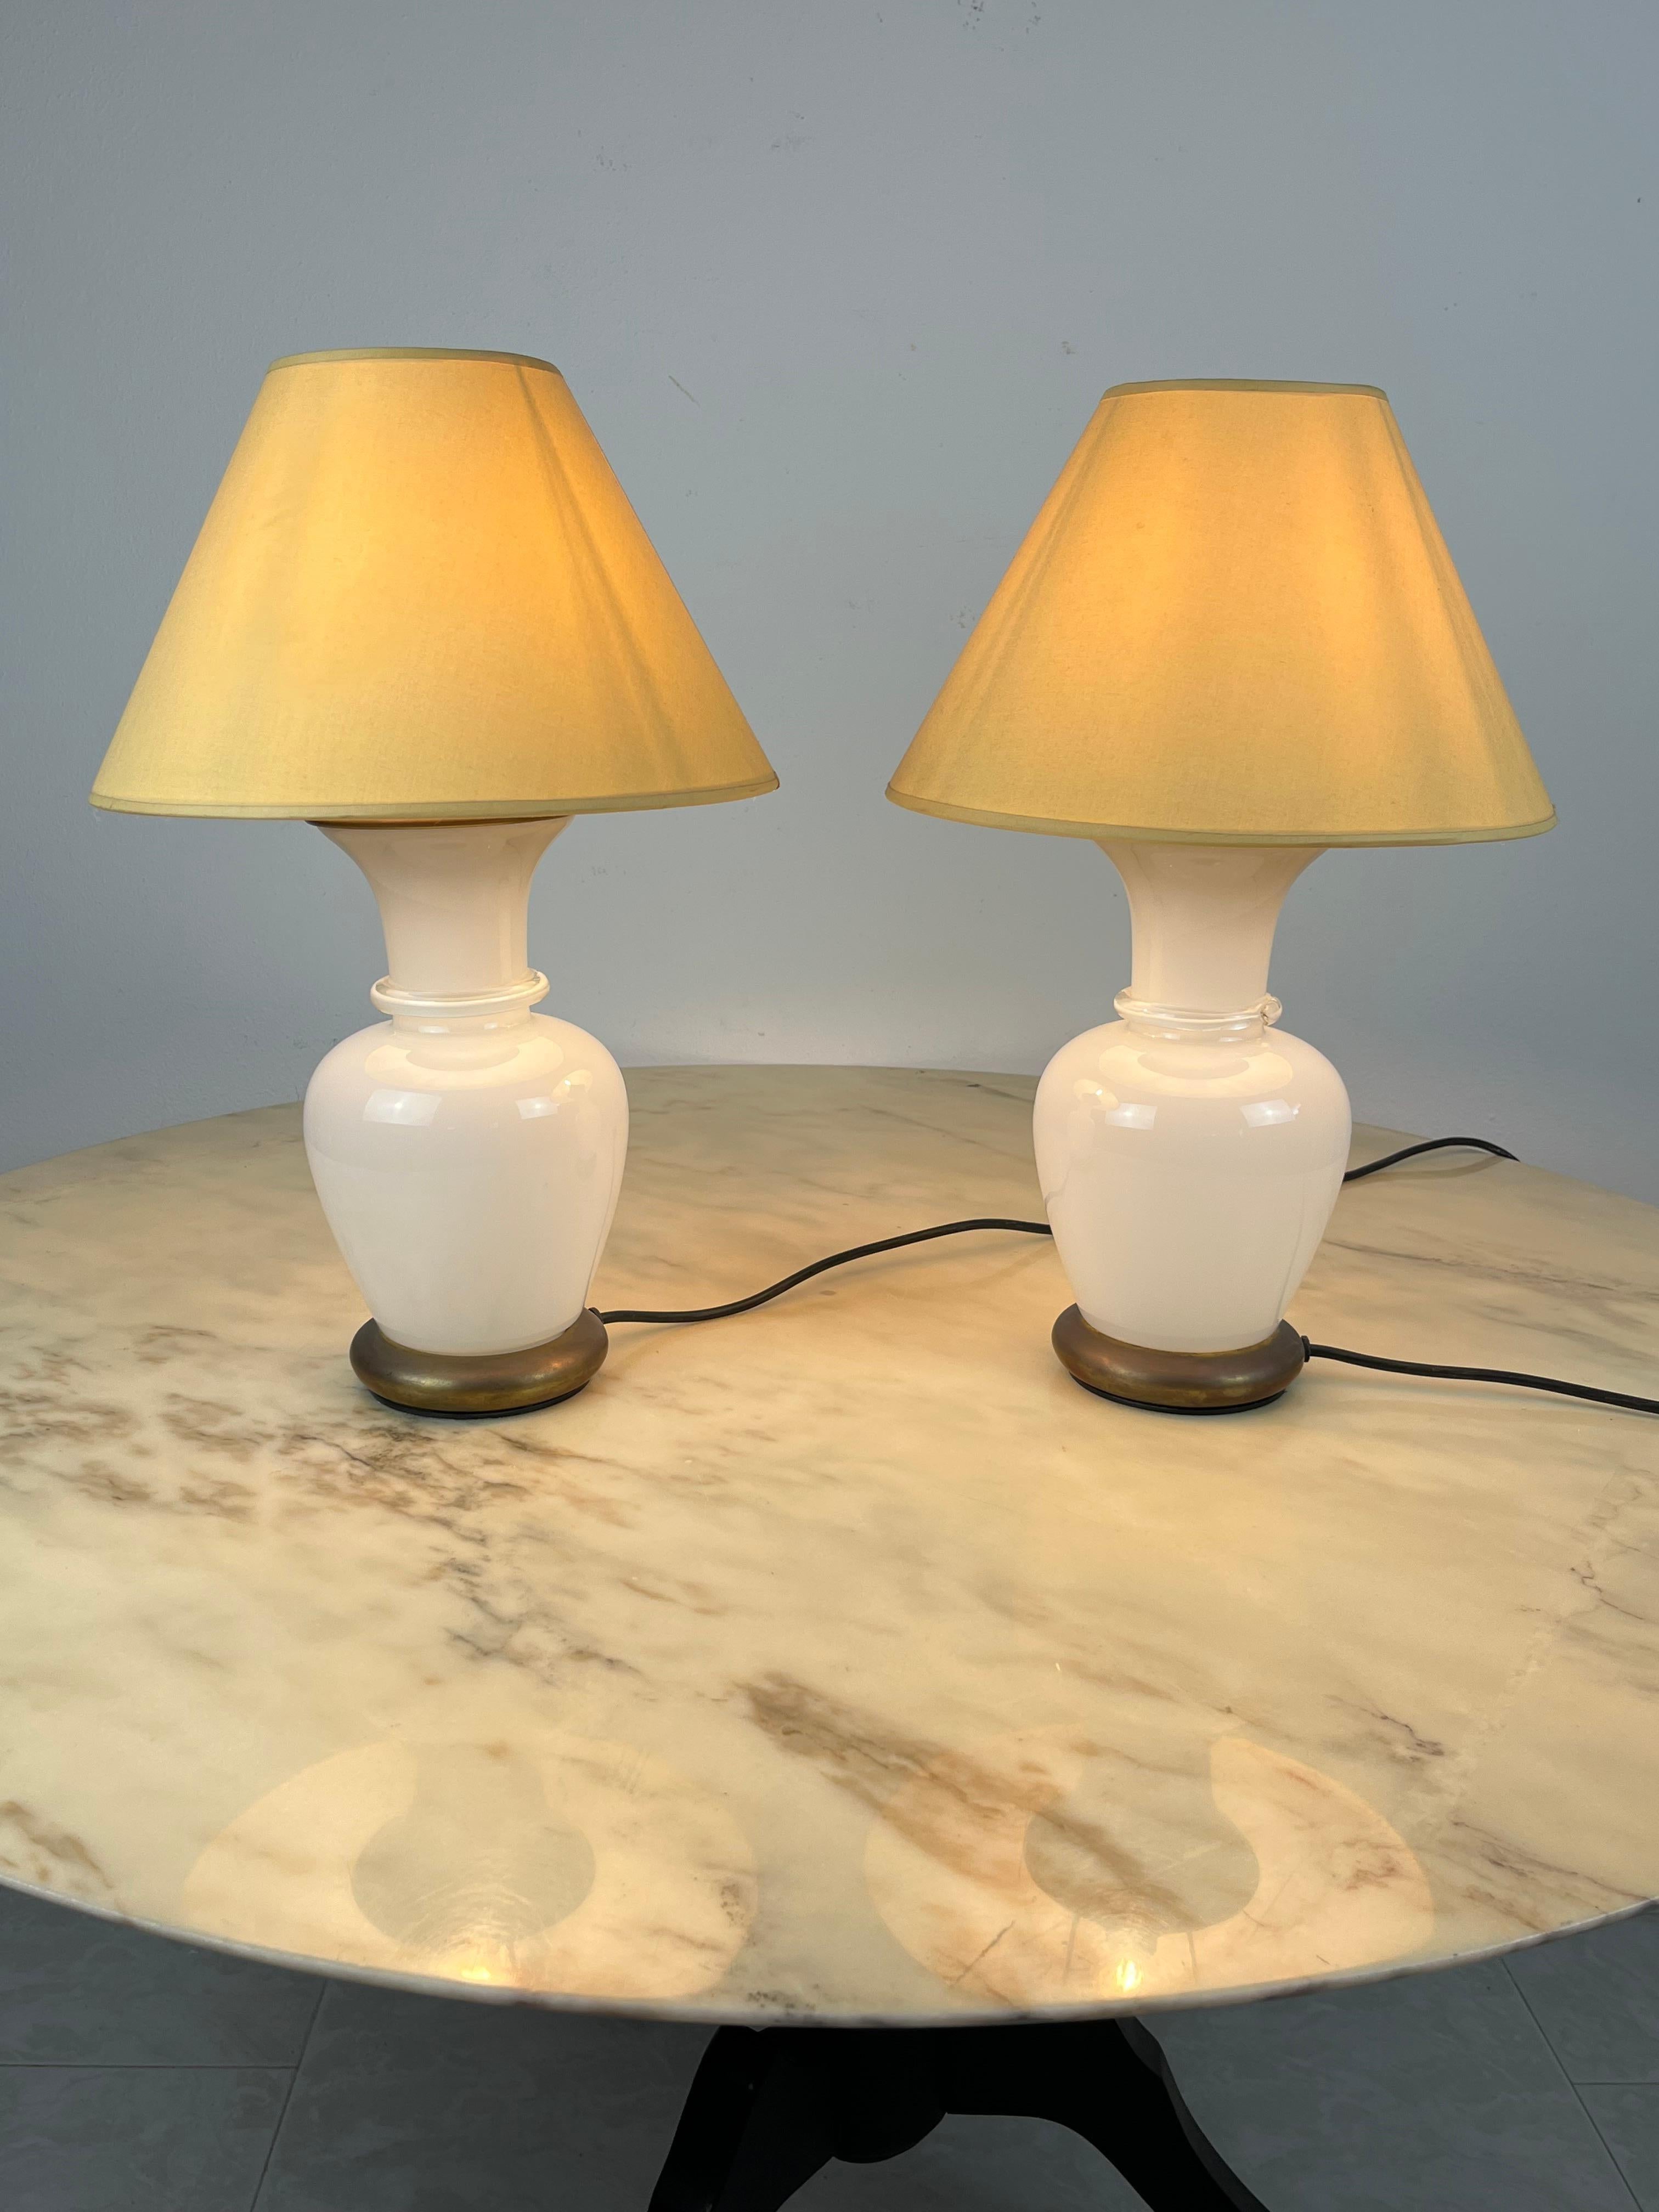 Set of 2 Murano glass and brass table lamps, F. Fabbian, Italy, 1970s
Found in a noble apartment.
Very beautiful and particular because they have a double switch. Each has a lamp inside the pot-bellied part and one in the lampshade housing. High 43